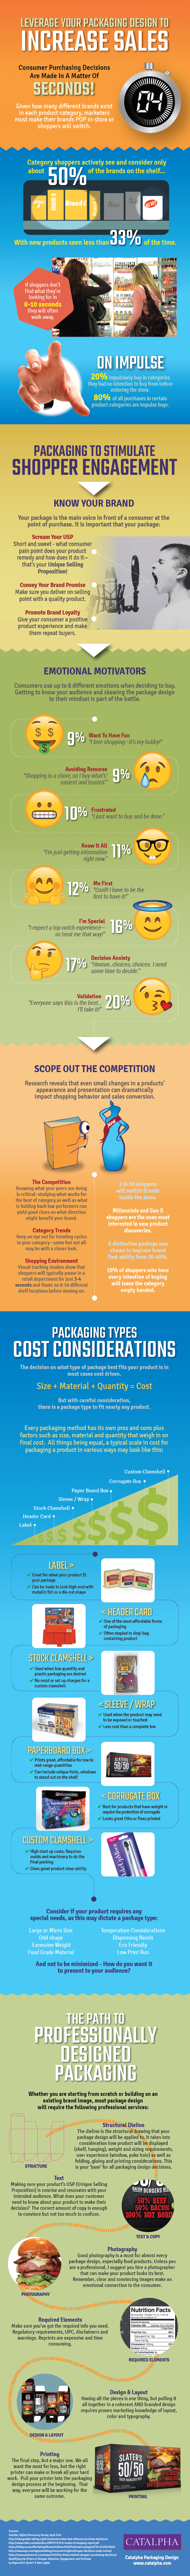 Leverage Packaging Design To Increase Sales